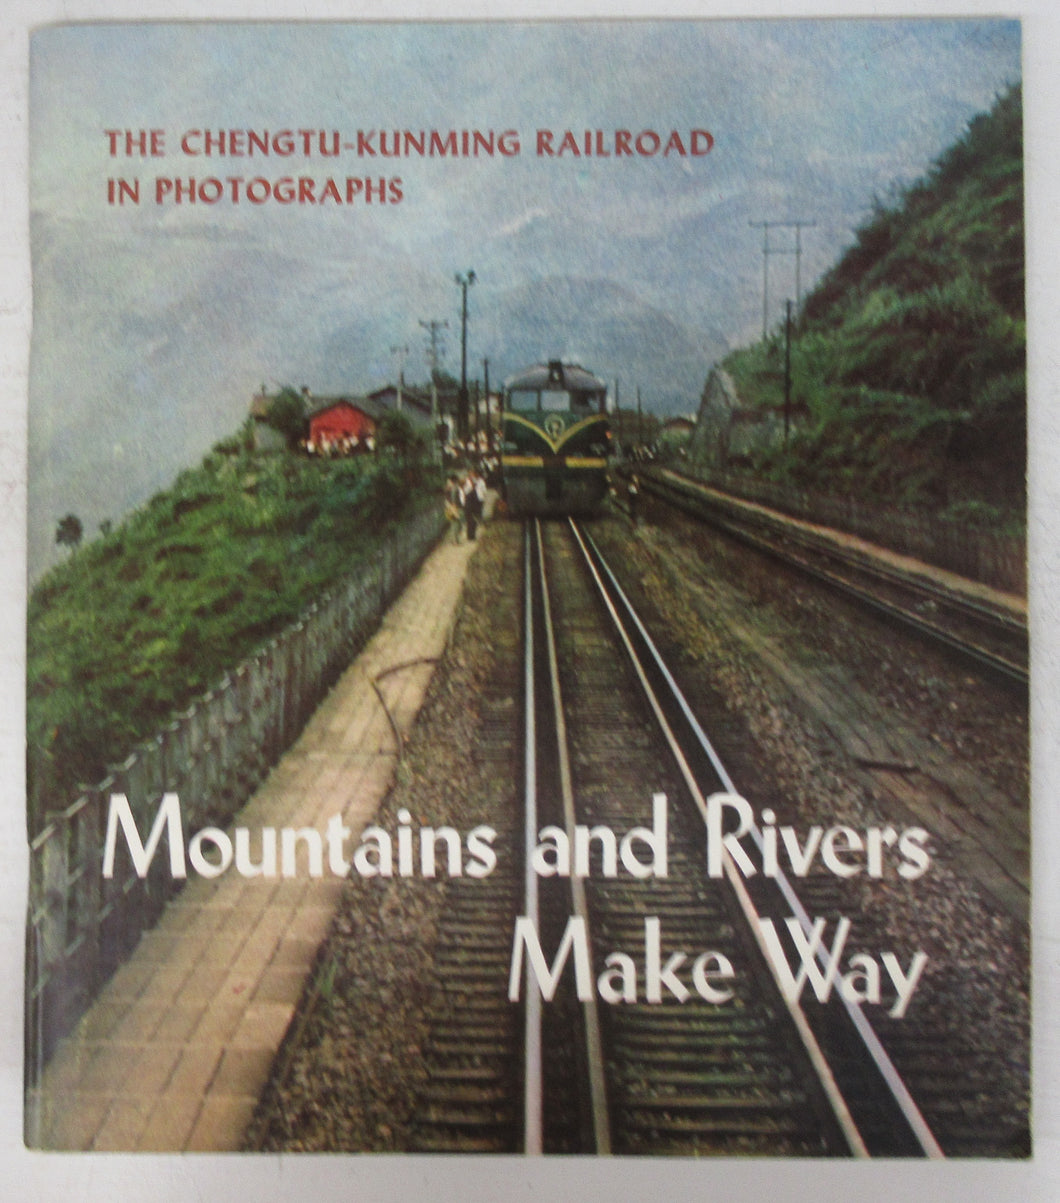 Mountains and Rivers Make Way: The Chengtu-Kunming Railroad in Photographs